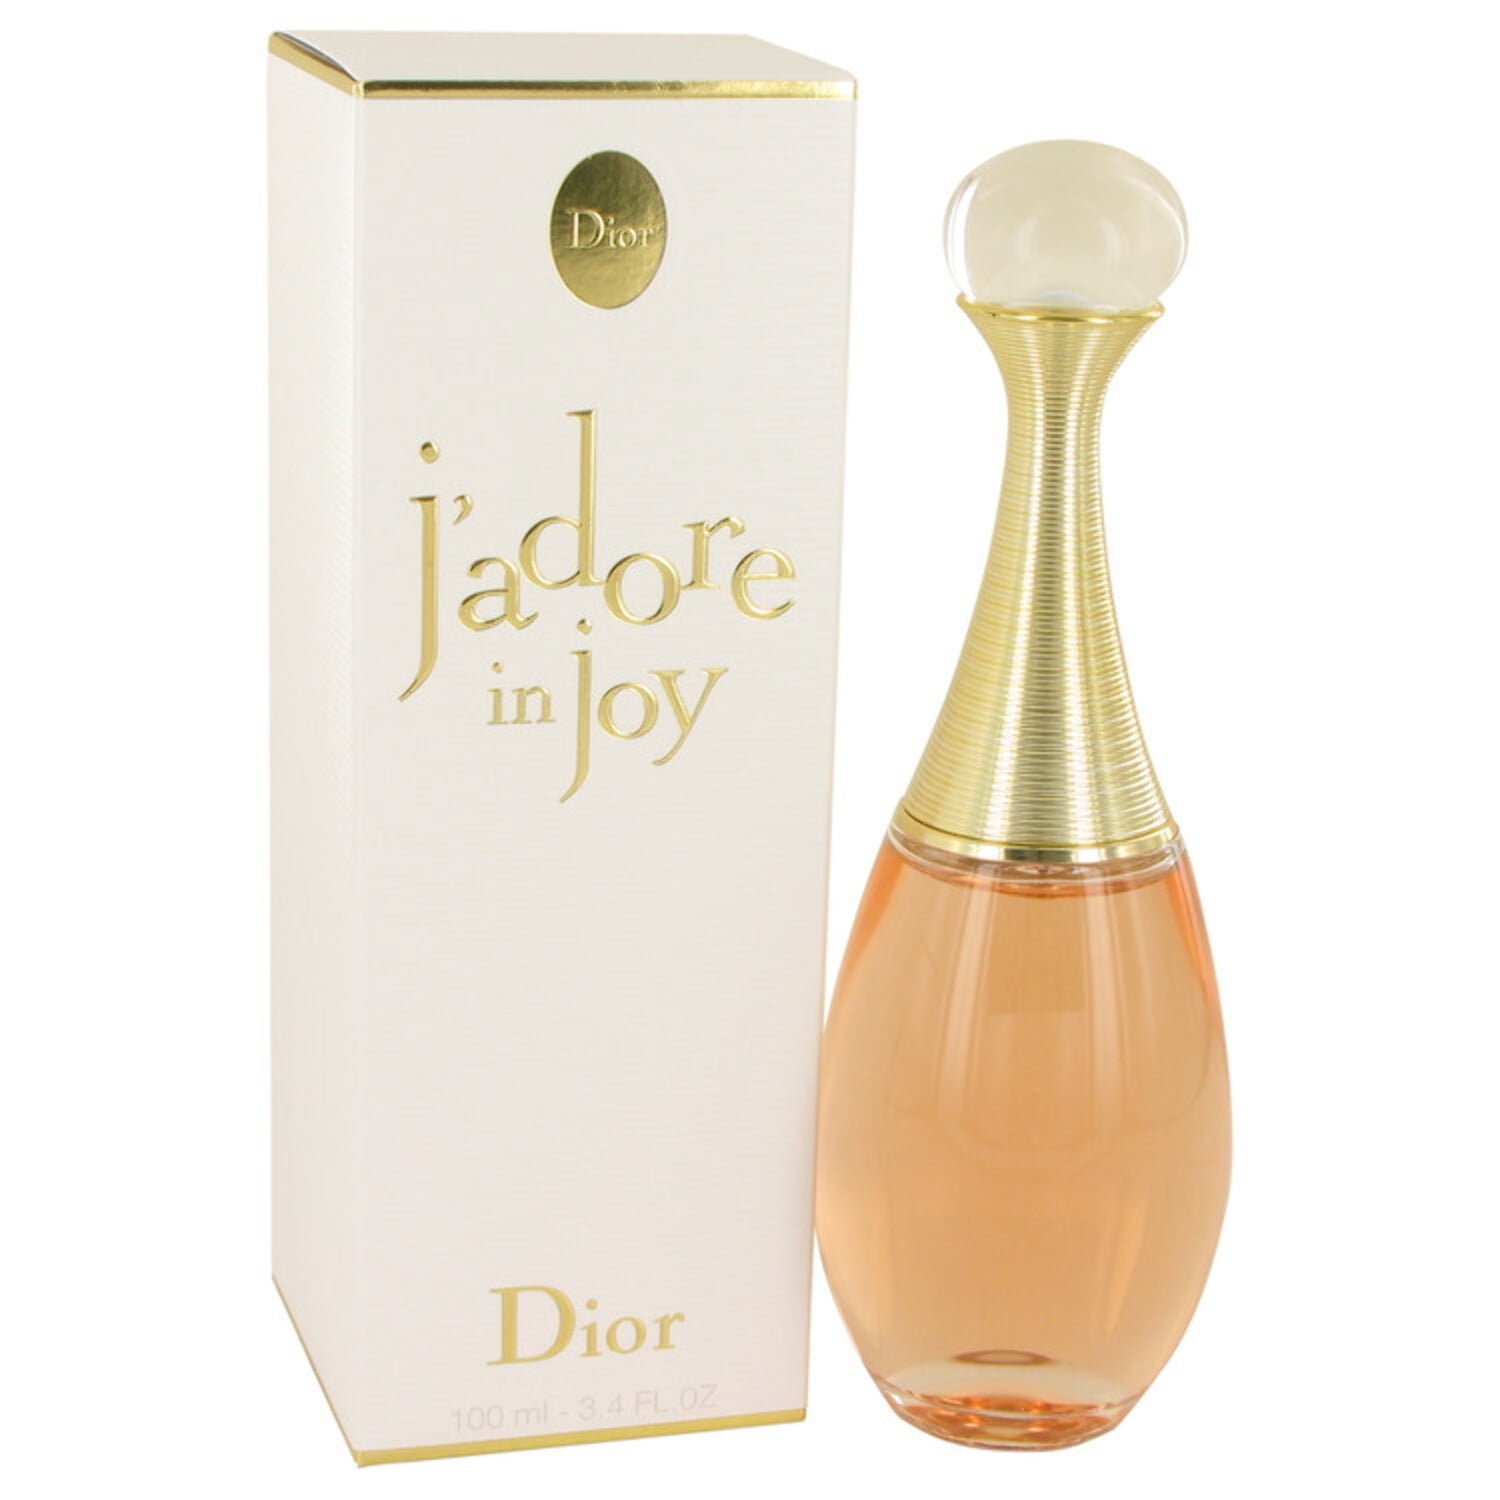 Dior  Jadore in Joy Eau de Toilette Review  The Happy Sloths Beauty  Makeup and Skincare Blog with Reviews and Swatches